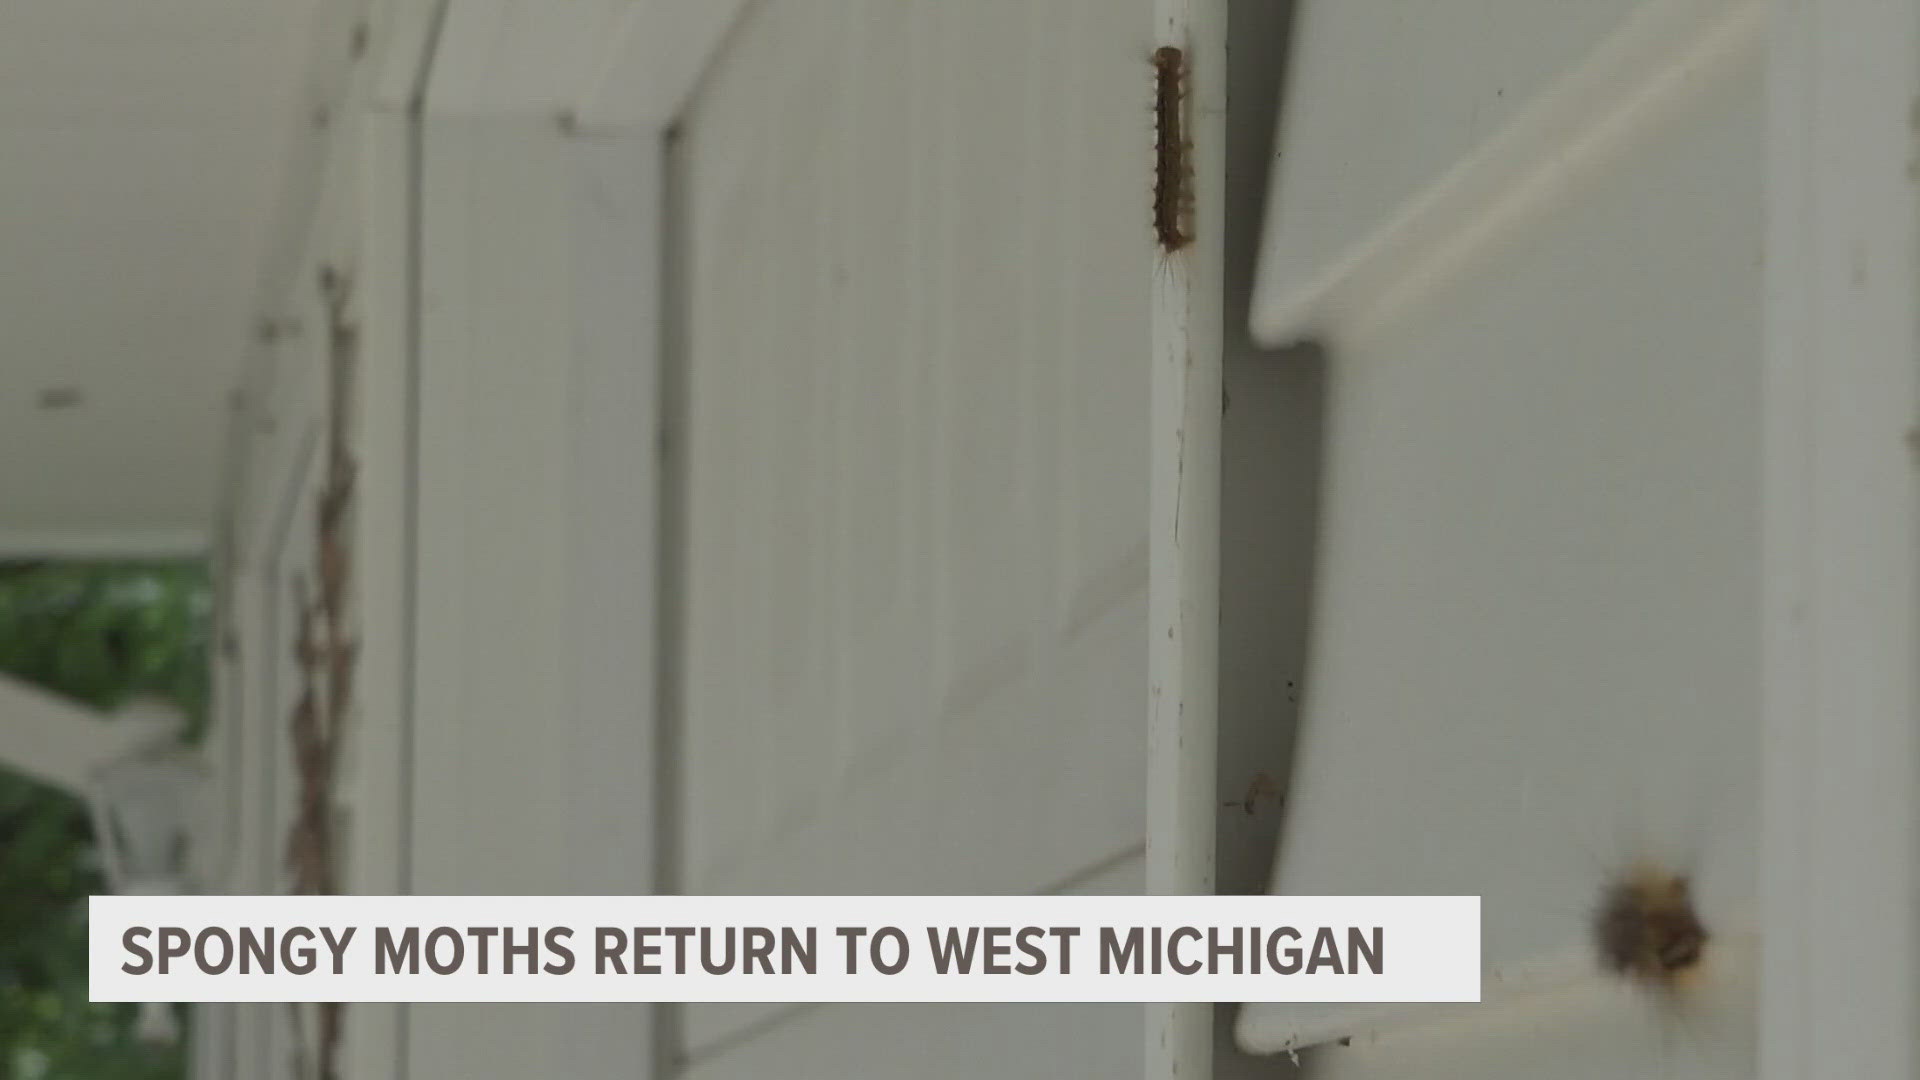 Spongy moths have returned to West Michigan and this year, they're invading different cities in the area.